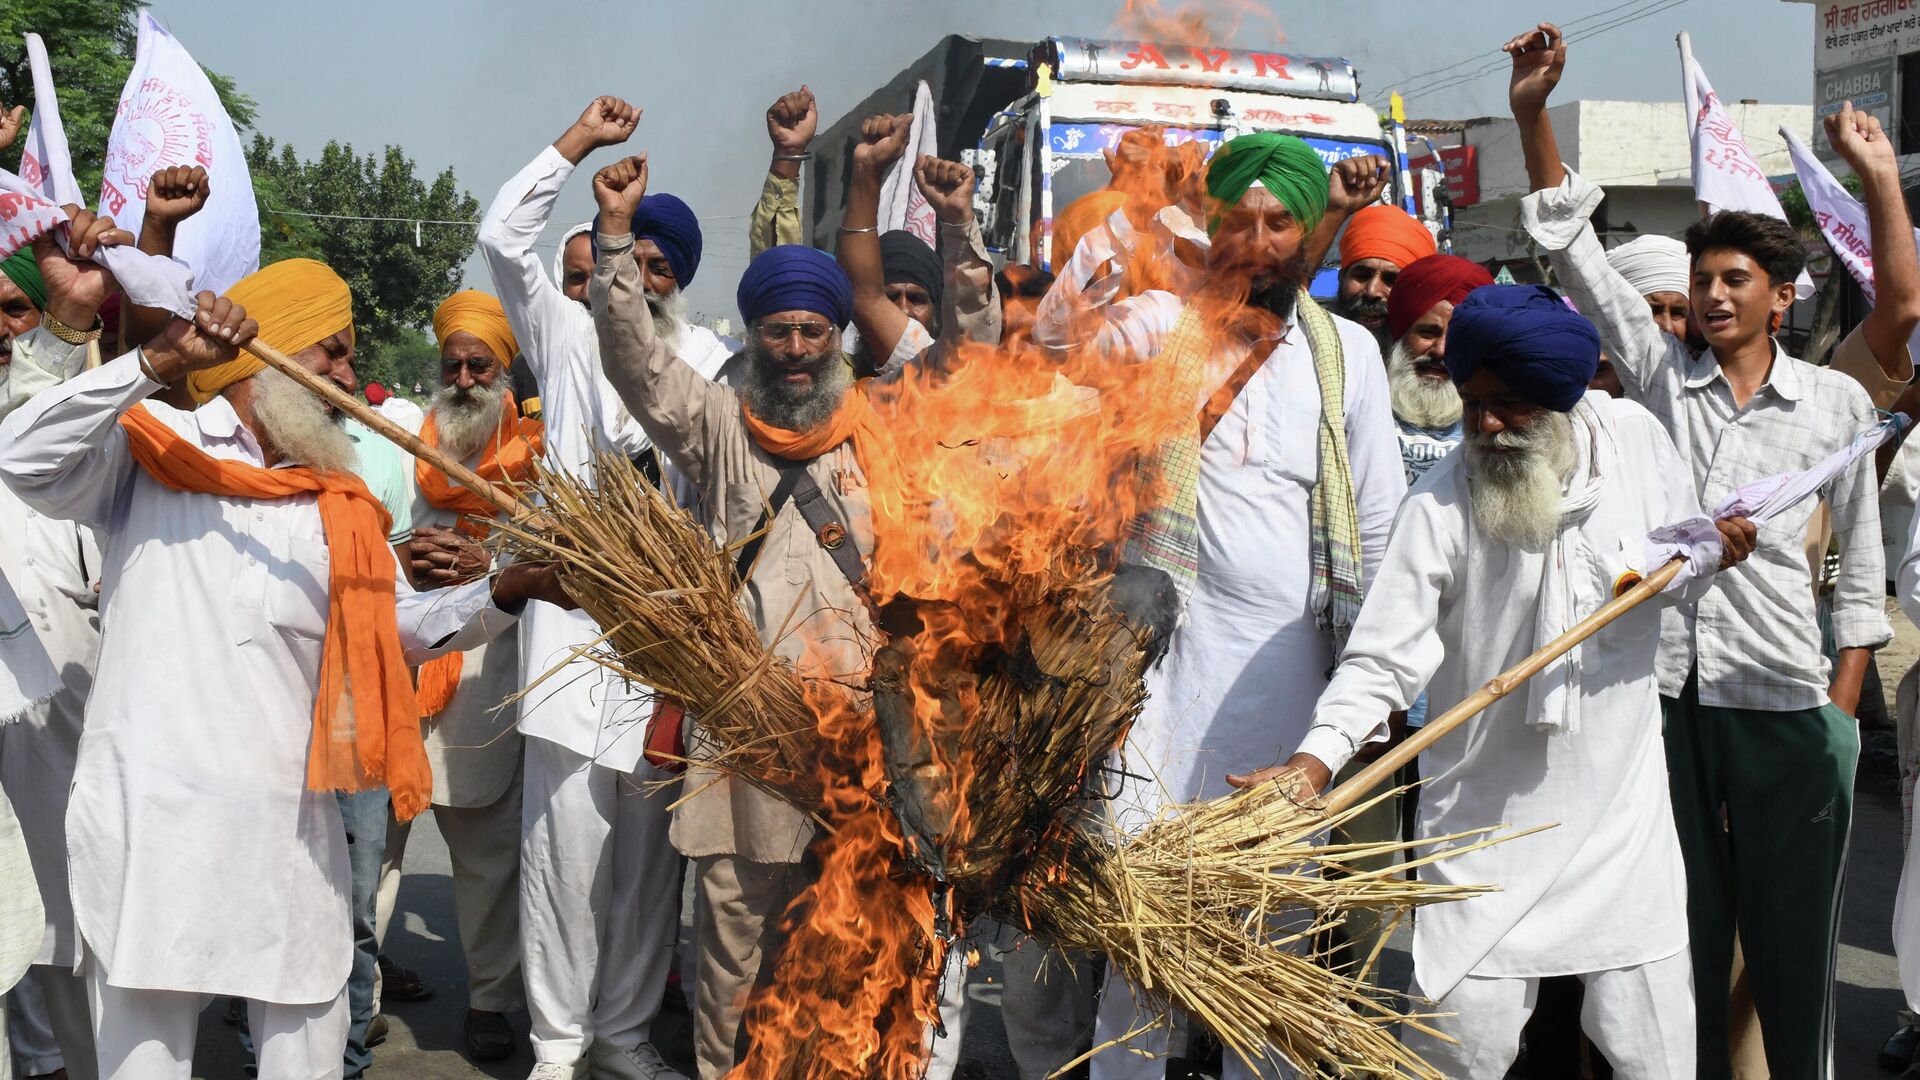 Farmers shout slogans as they burn an effigy of India's Prime Minister Narendra Modi and Uttar Pradesh state Chief Minister Yogi Adityanath during a protest on the outskirts of Amritsar on October 6, 2021, days after 9 people died in violent clashes during a farmers protest in Lakhimpur Kheri district in Utta Pradesh - Sputnik International, 1920, 08.10.2021